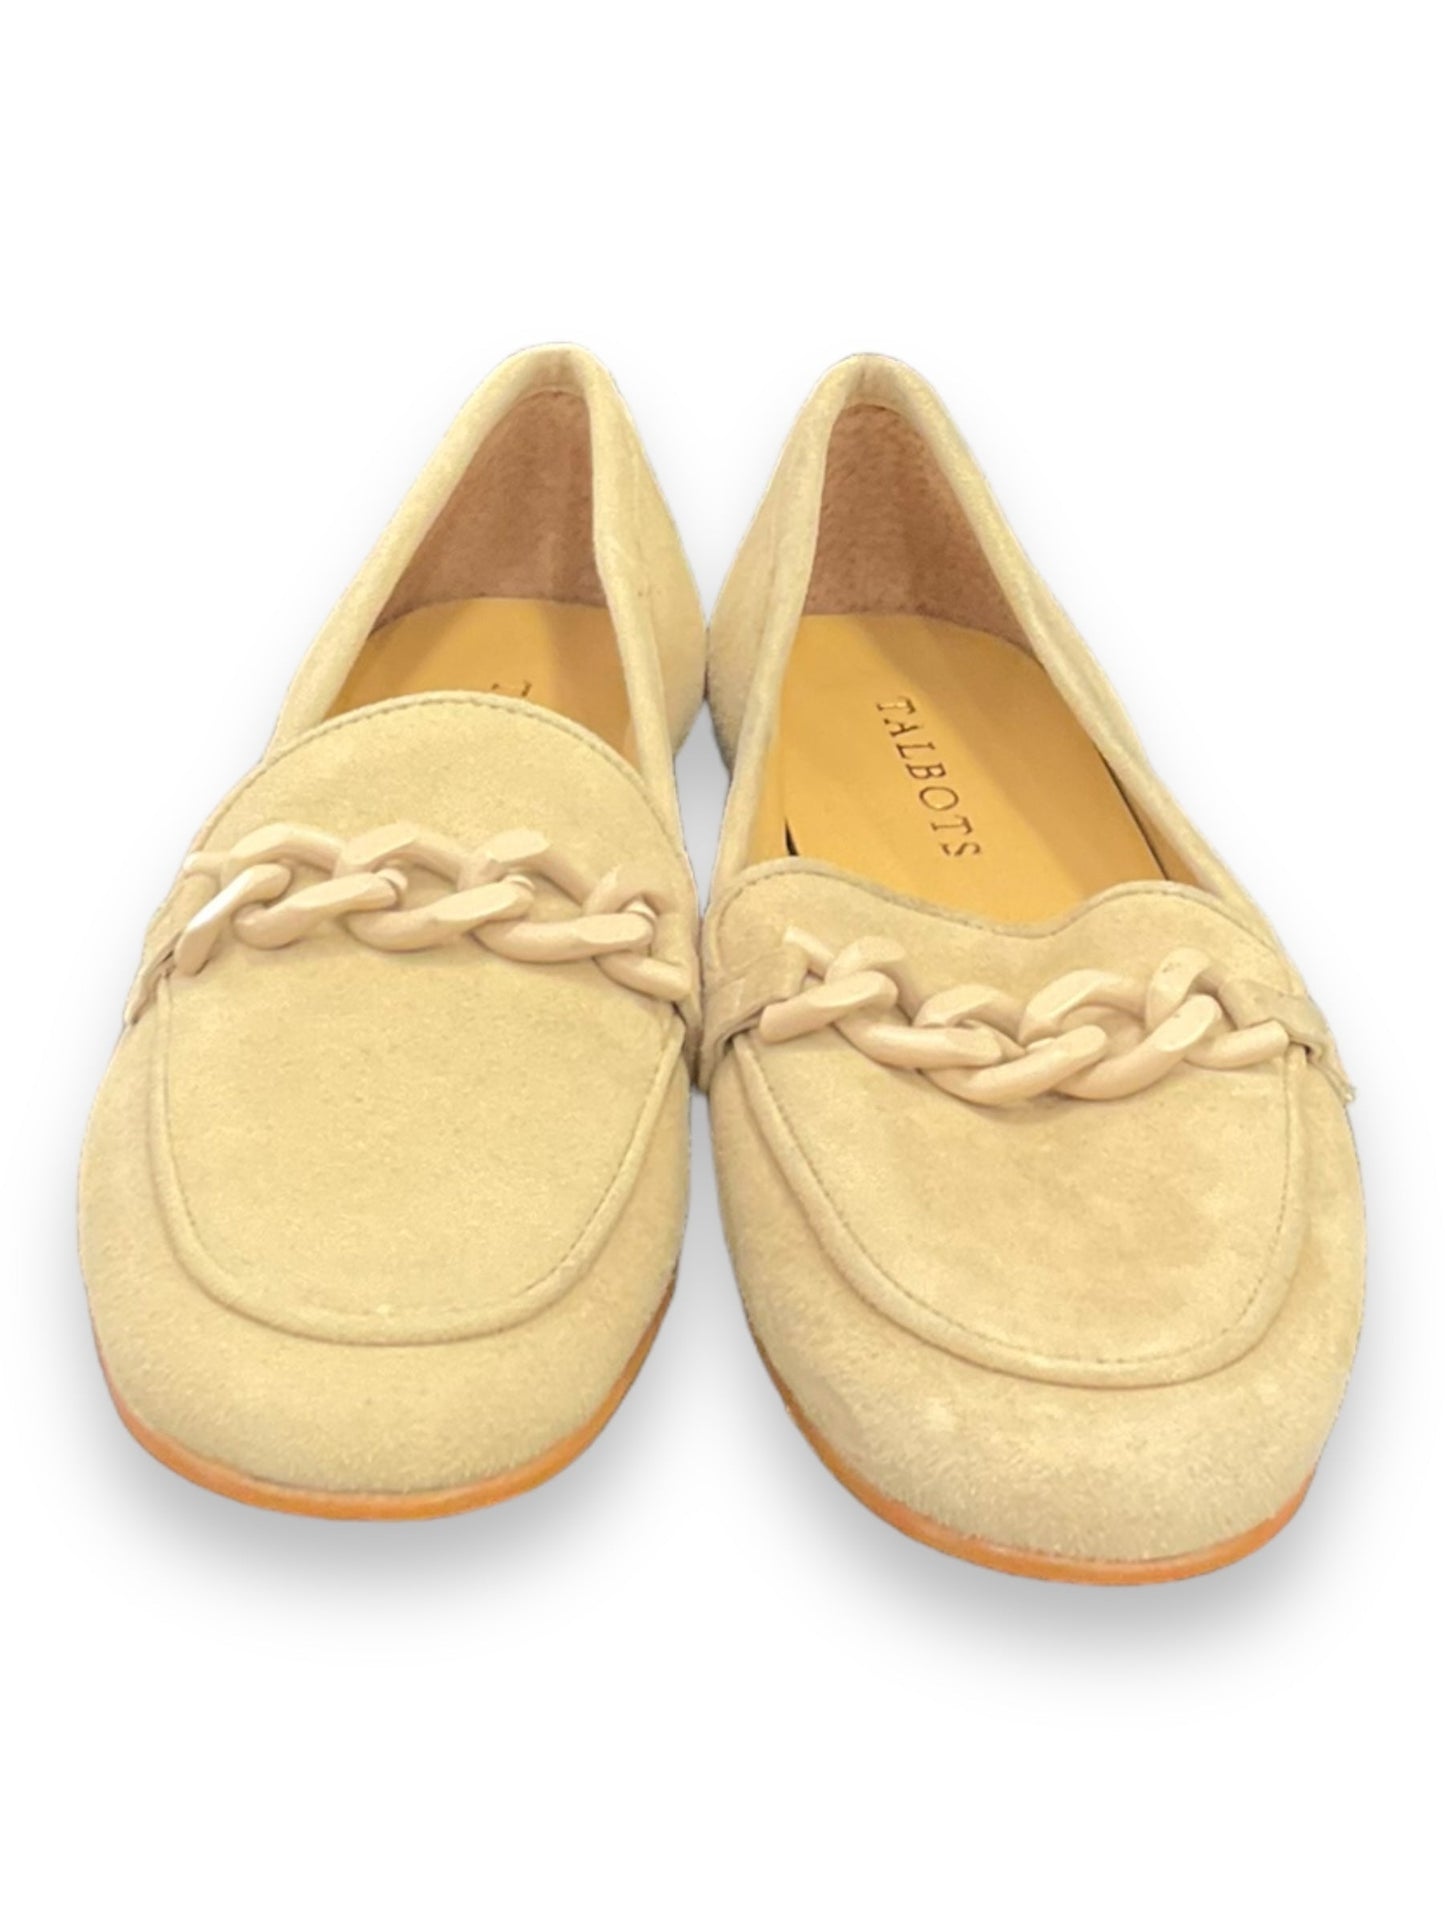 Shoes Flats By Talbots  Size: 7